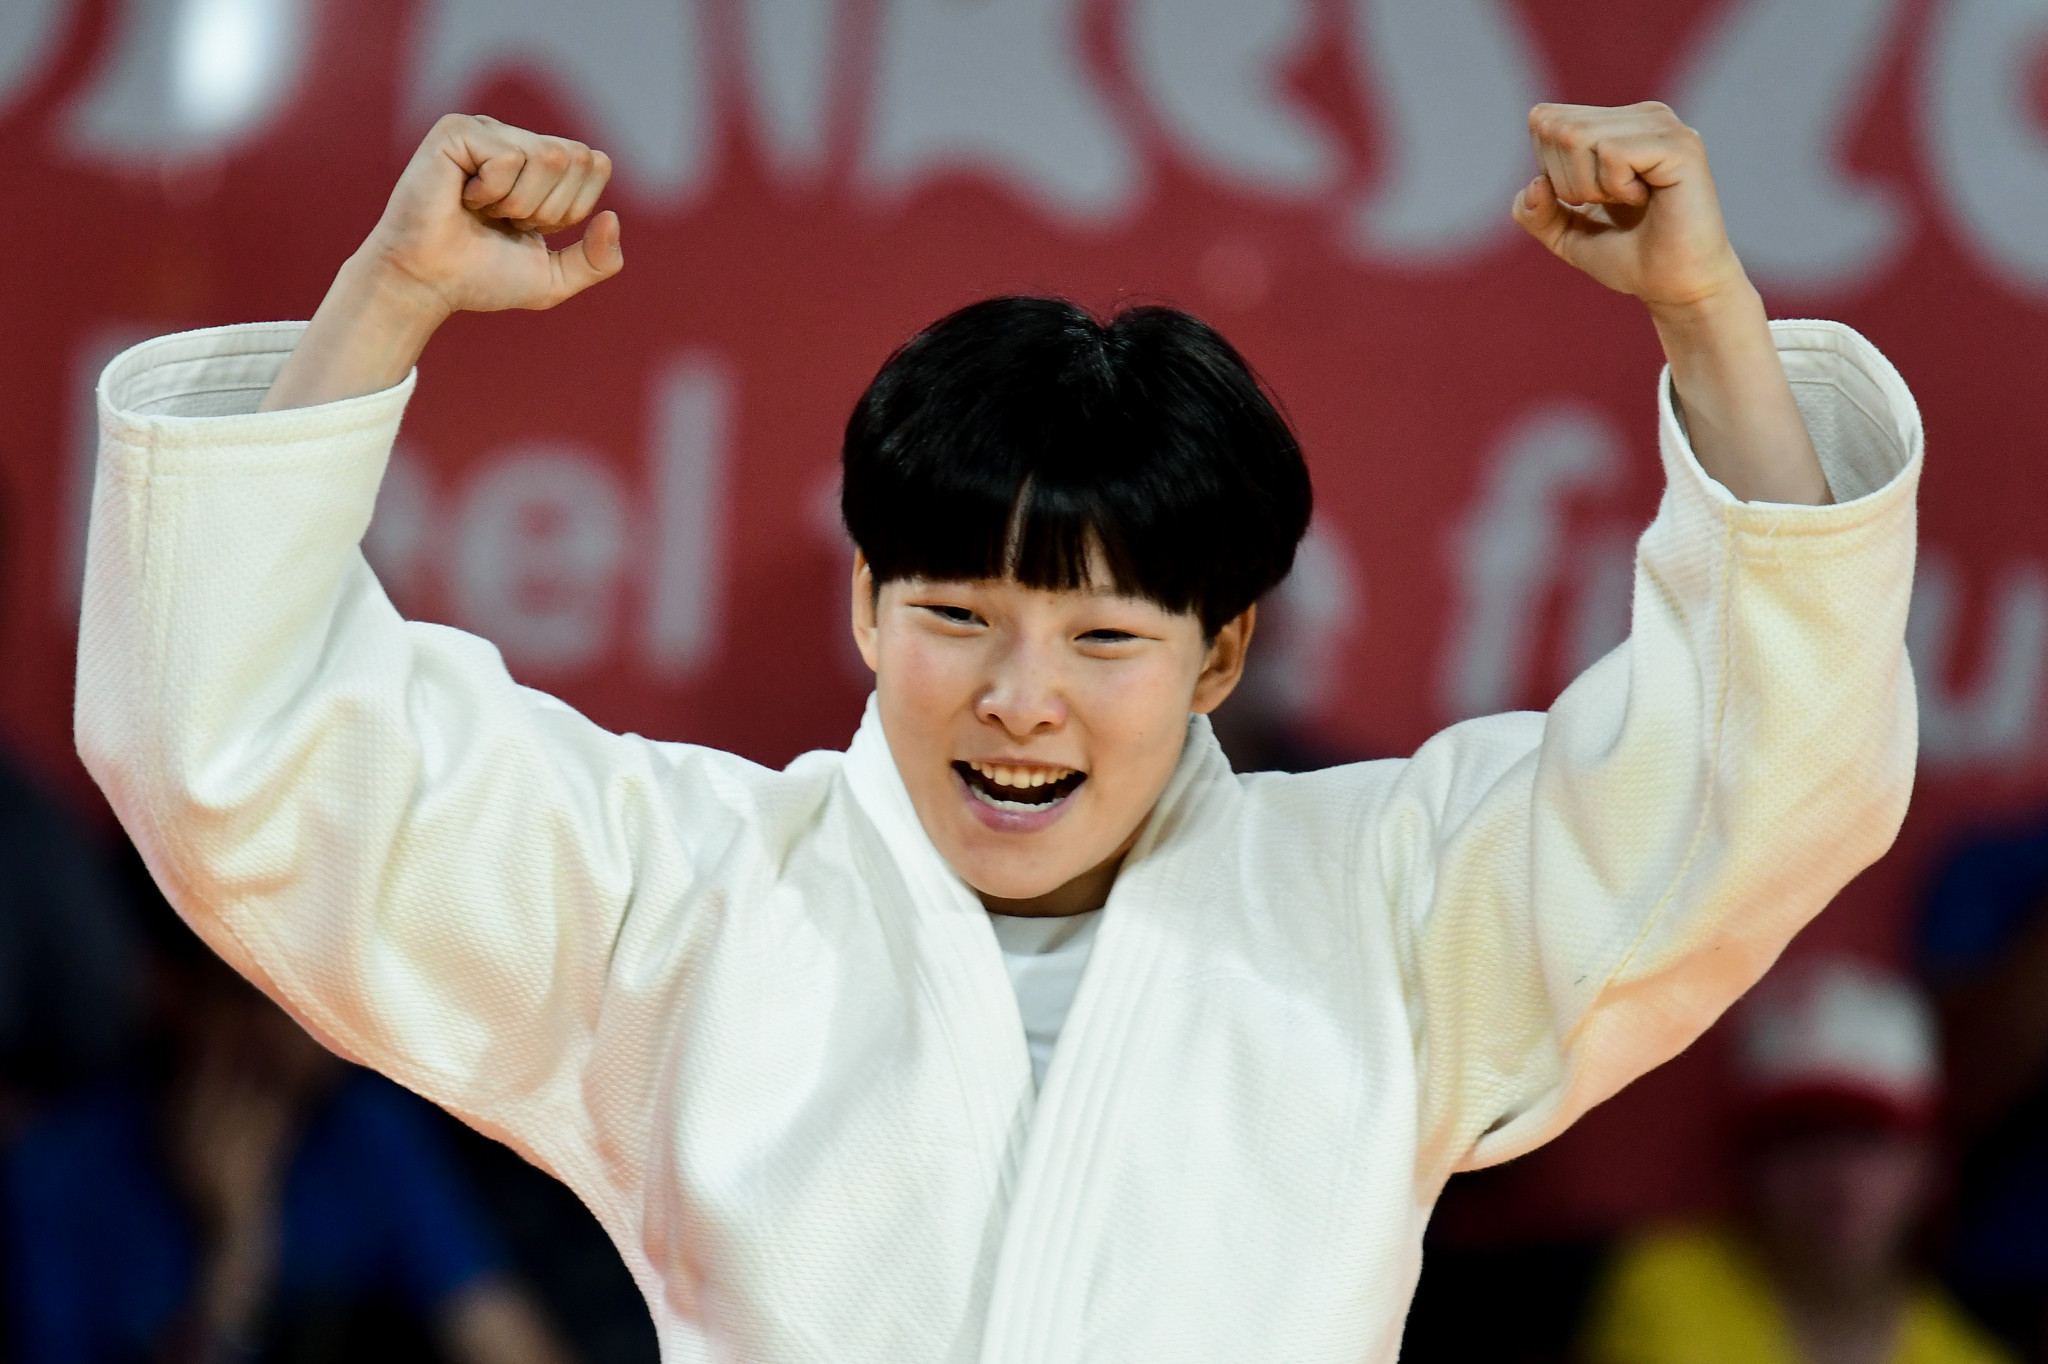 Success was also celebrated as judo action continued ©Getty Images